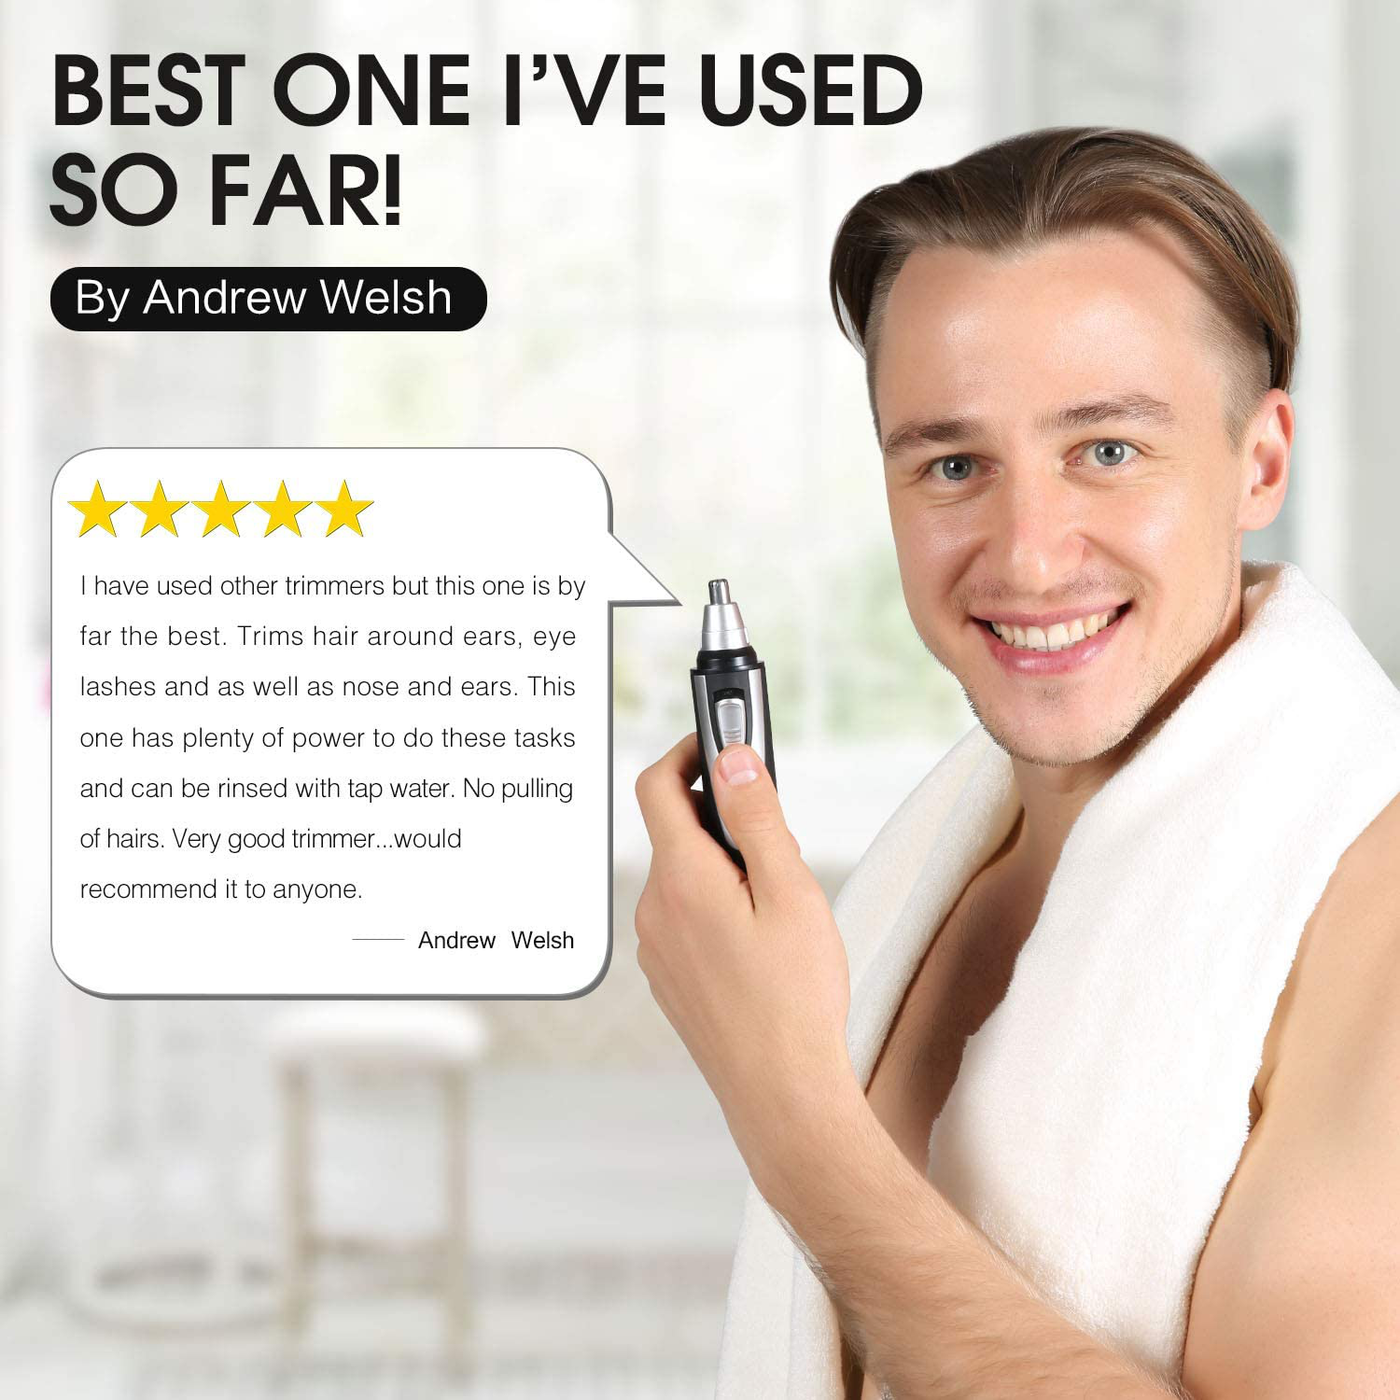 Ear and Nose Hair Trimmer Clipper - 2021 Professional Painless Eyebrow & Facial Hair Trimmer for Men Women, Battery-Operated Trimmer with IPX7 Waterproof, Dual Edge Blades for Easy Cleansing White